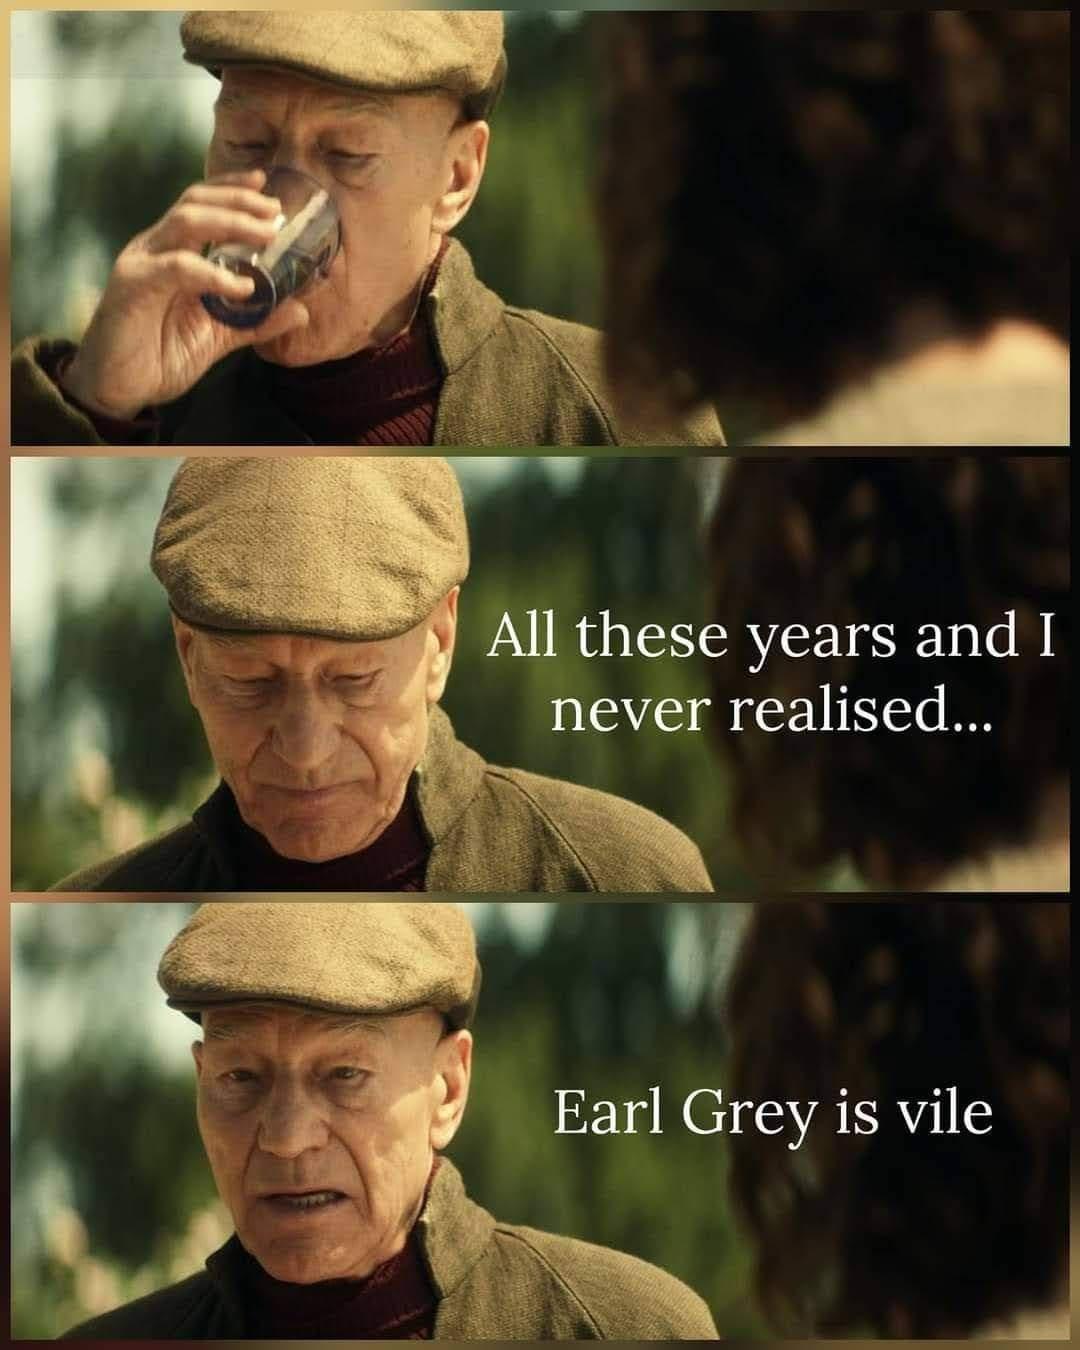 photo caption - All these years and I never realised... Earl Grey is vile